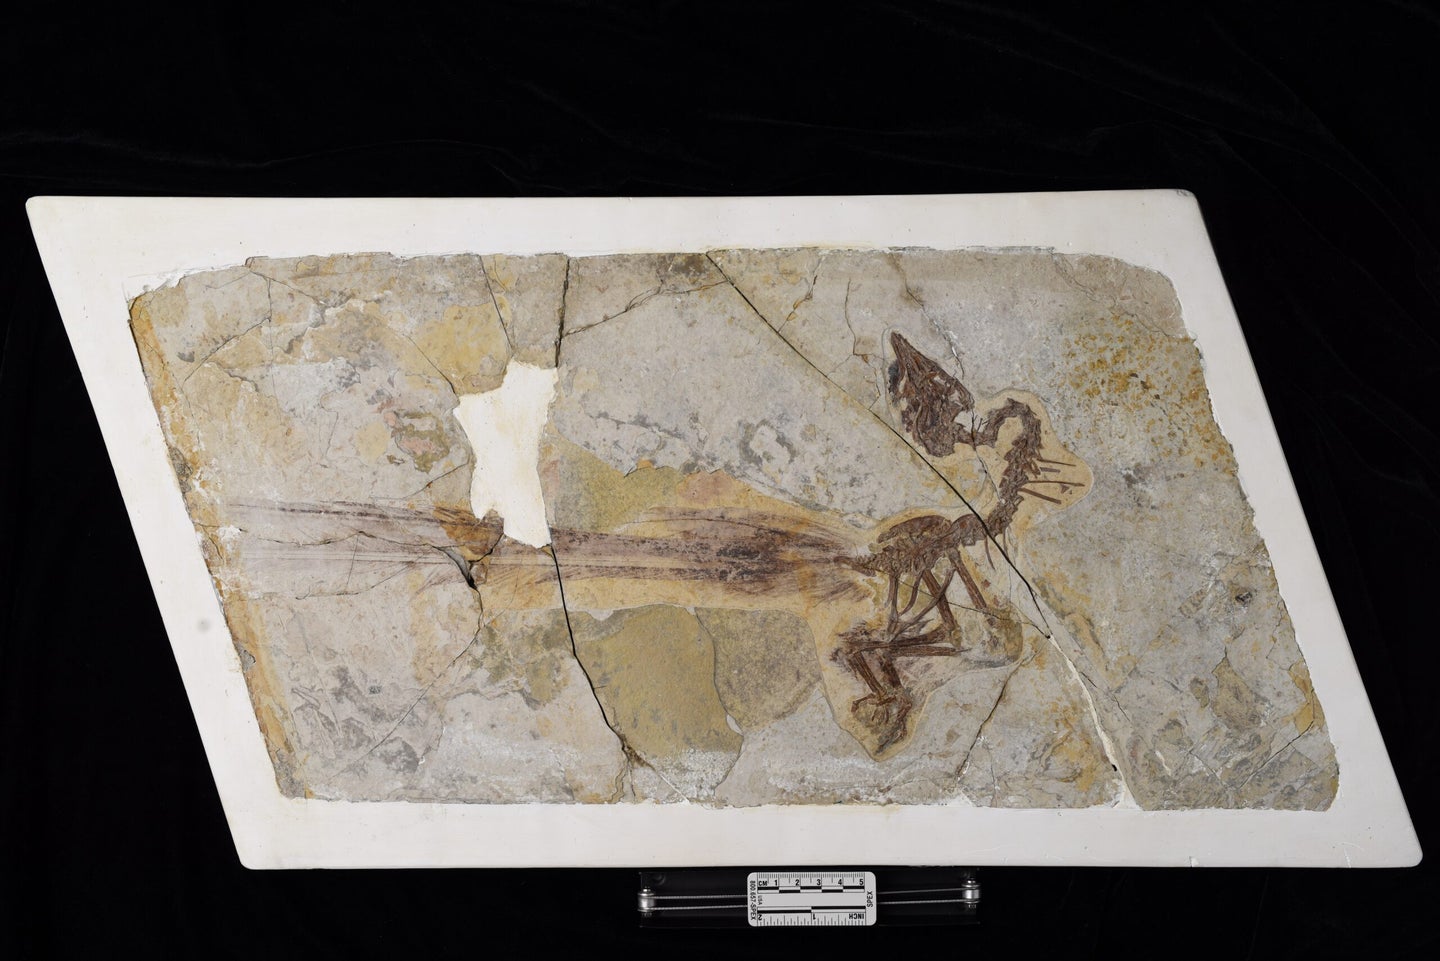 The holotype fossil of Yuanchuavis. 